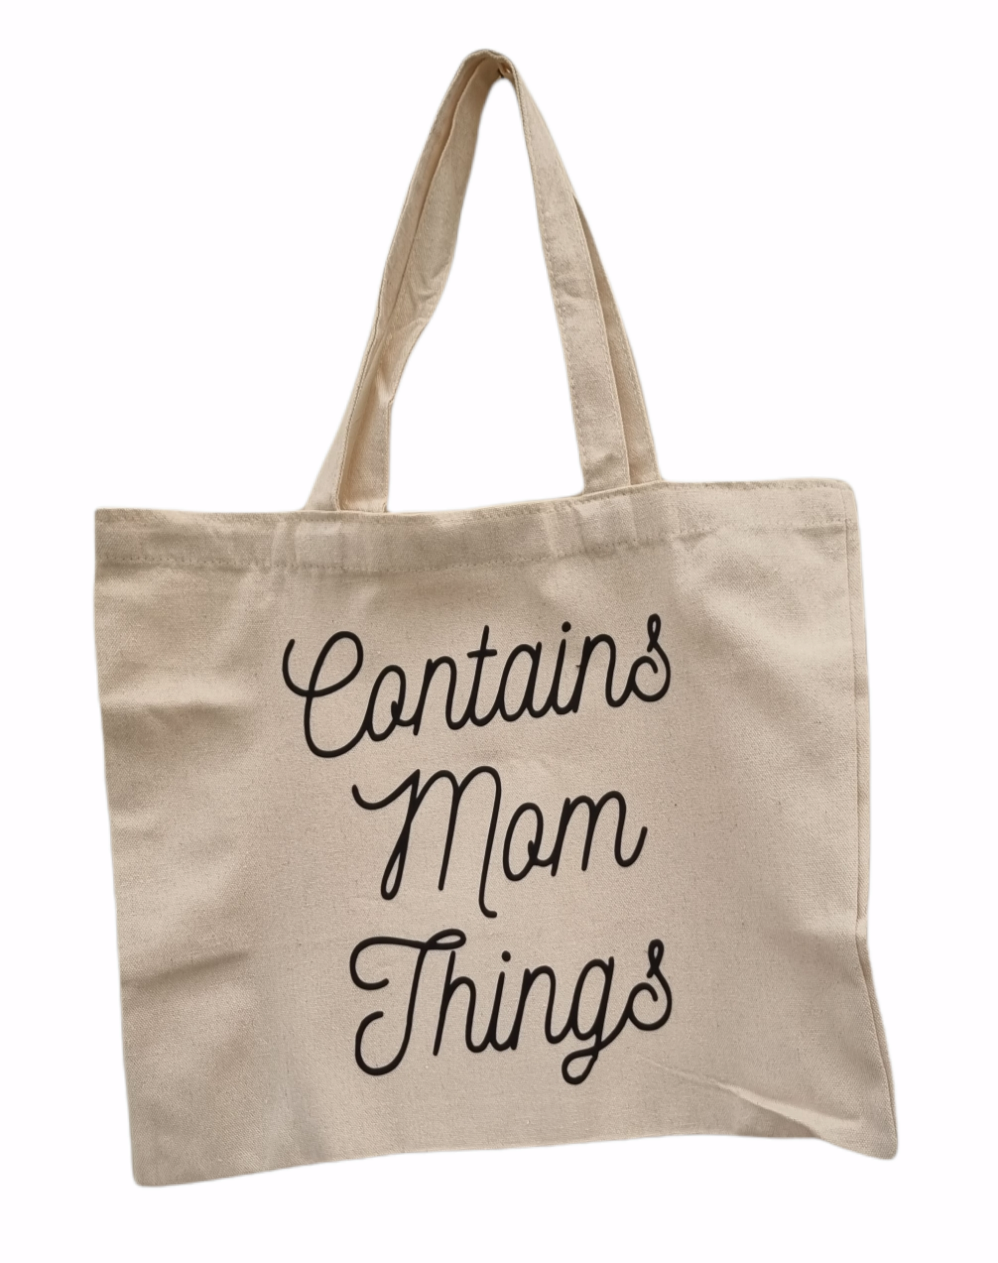 Contains Mom Thing's Tote